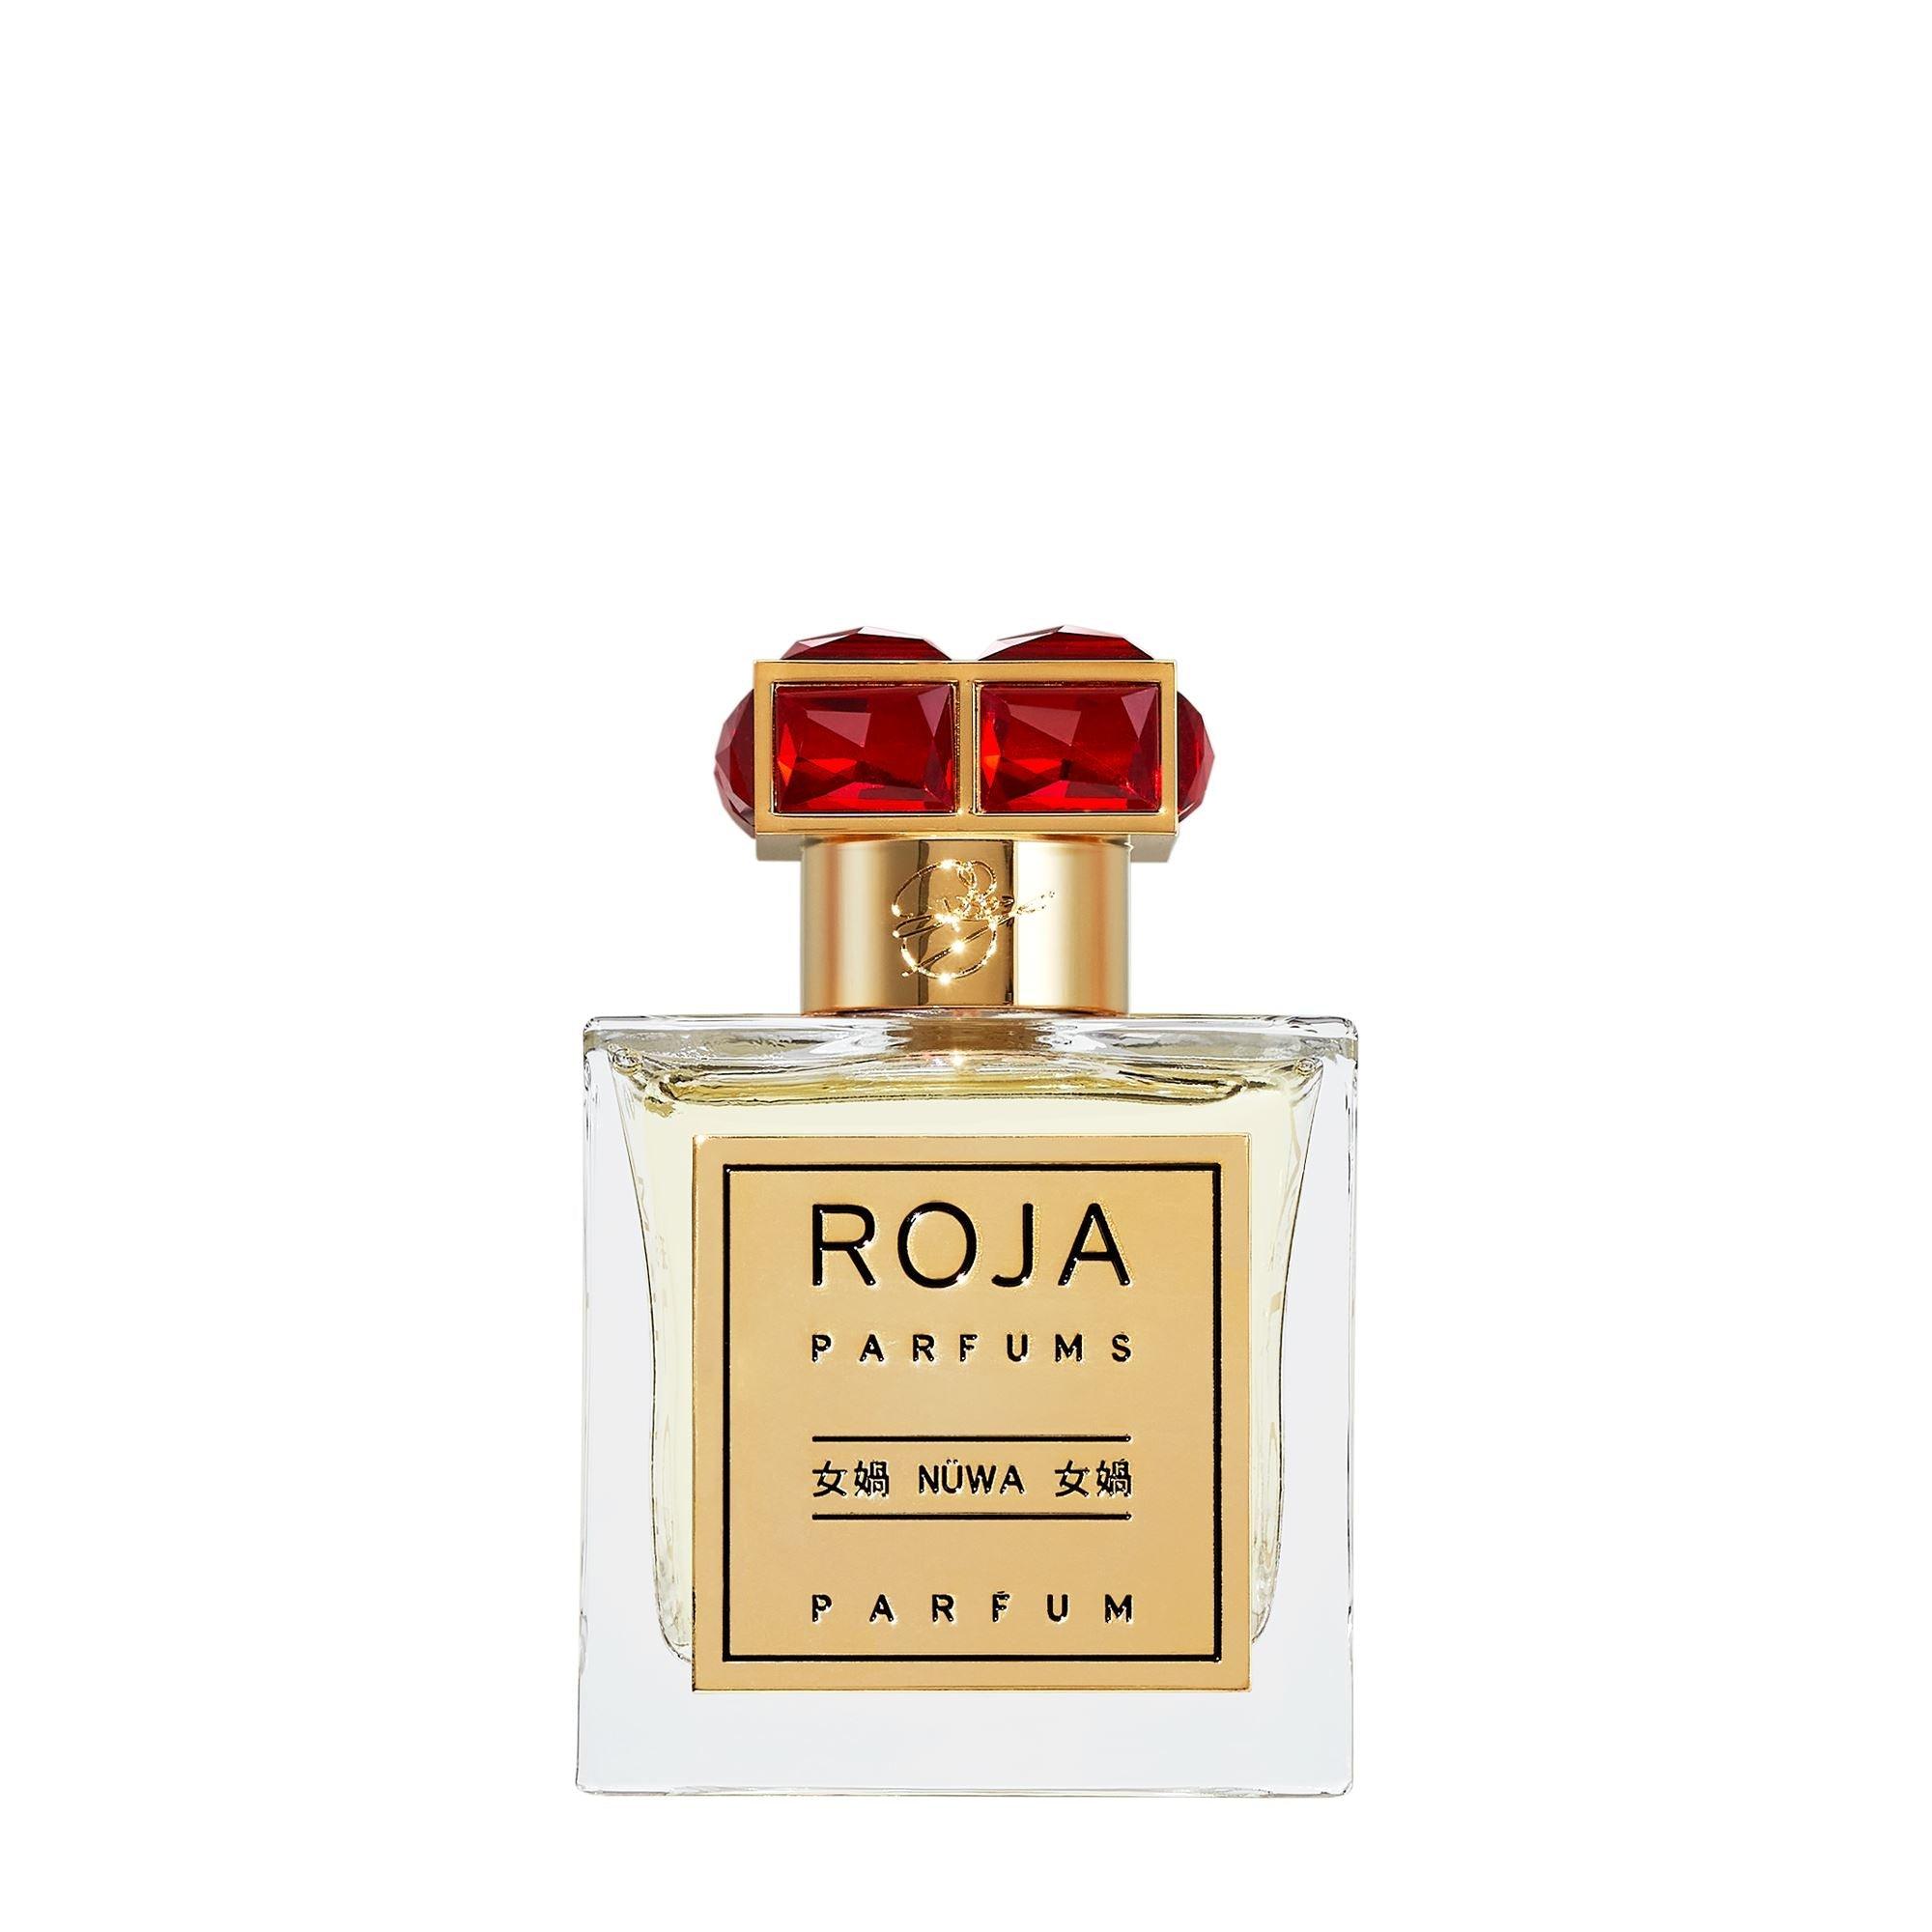 Roja Nuwa Parfum 100ml (New Fragrance) - undefined - TheFirstScent -Hong Kong